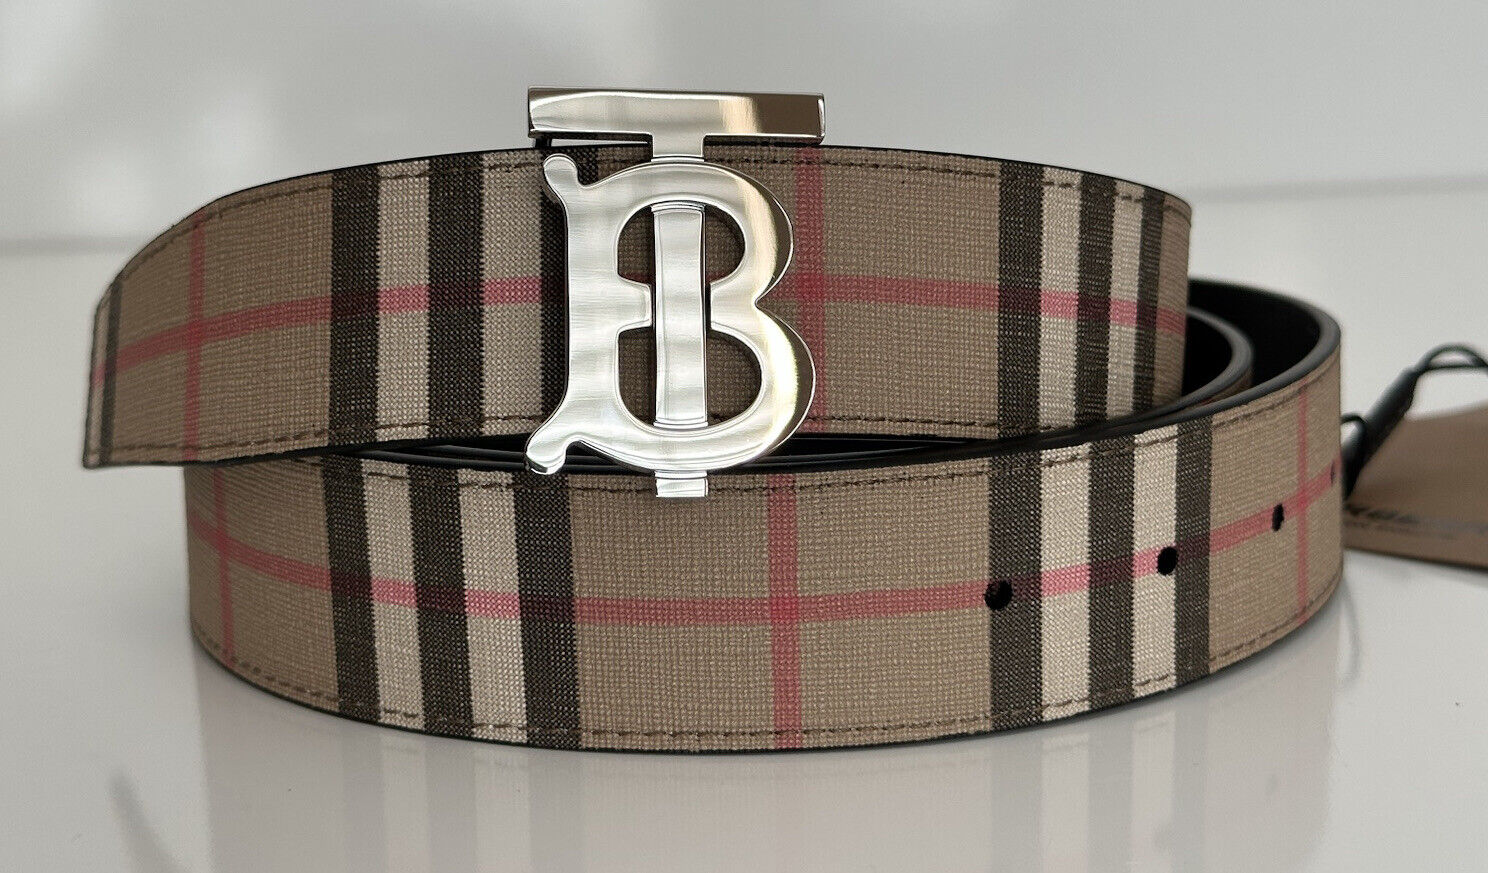 Burberry TB Leather Archive Beige Reversible Belt 40/100 8046568 Italy New $580